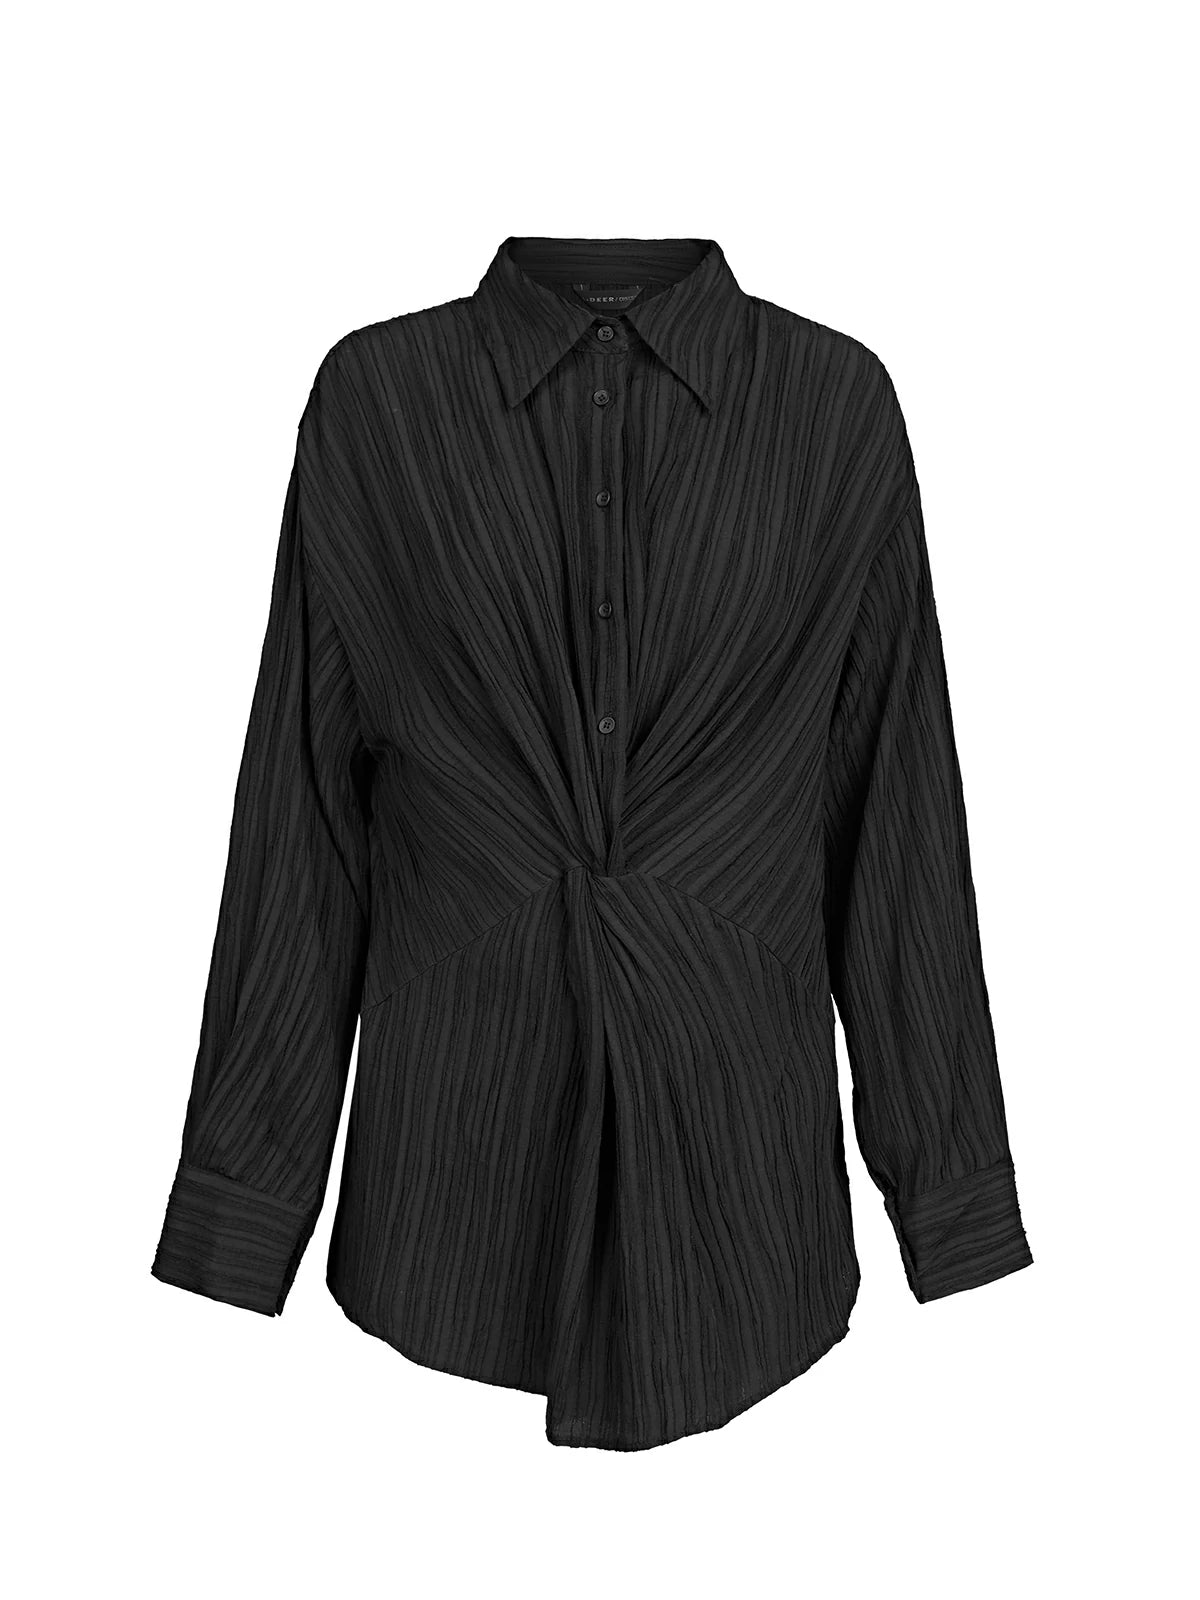 Unique charm emphasized in this black shirt with a front knot